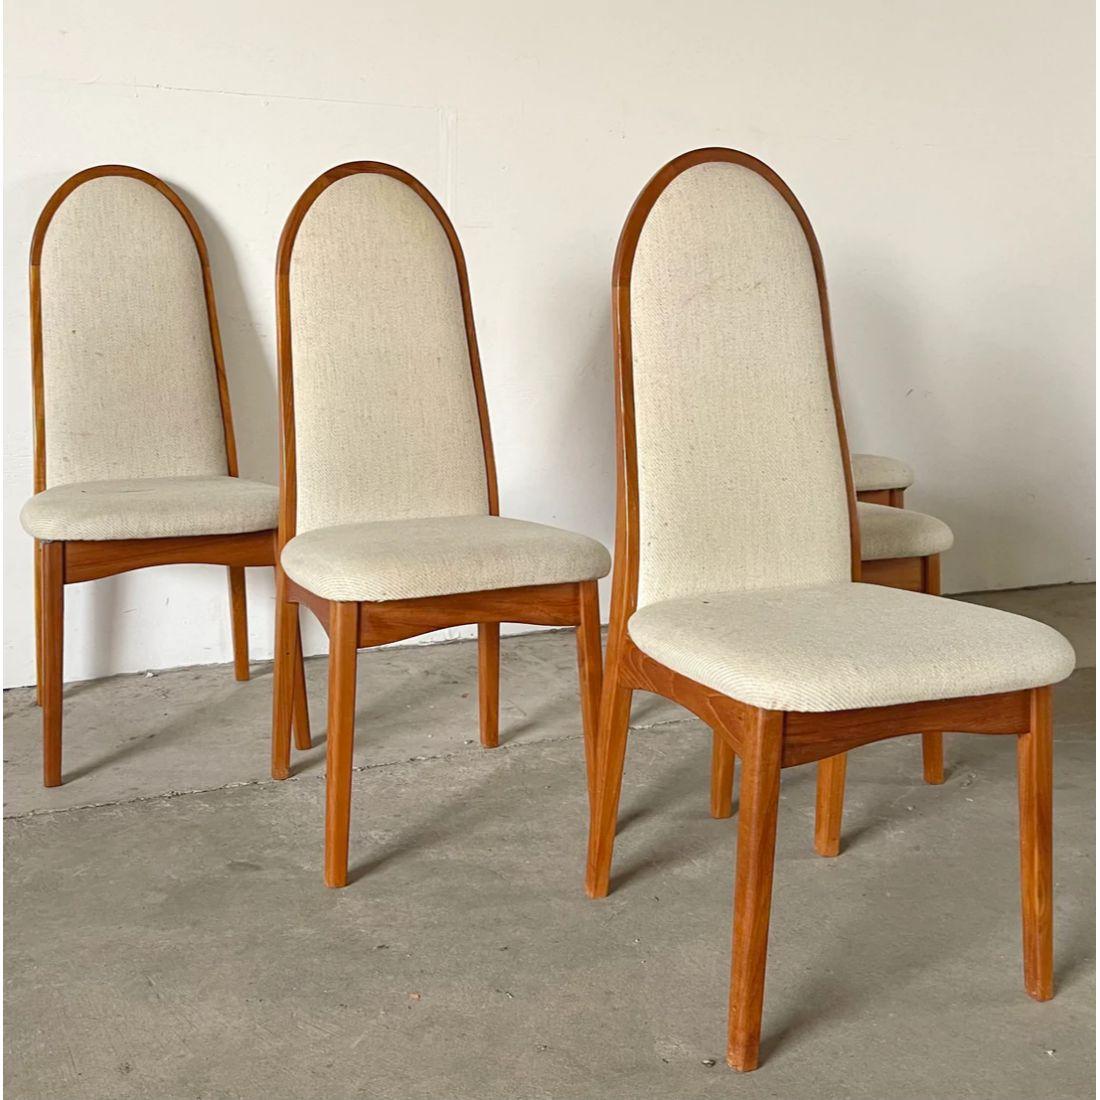 This stylish pair of Mid-Century Modern shell chairs feature sturdy metal frames and molded plastic seats. The comfortable proportions of this matching pair of Eames style side chairs make an ideal seating addition for occasional office seating,